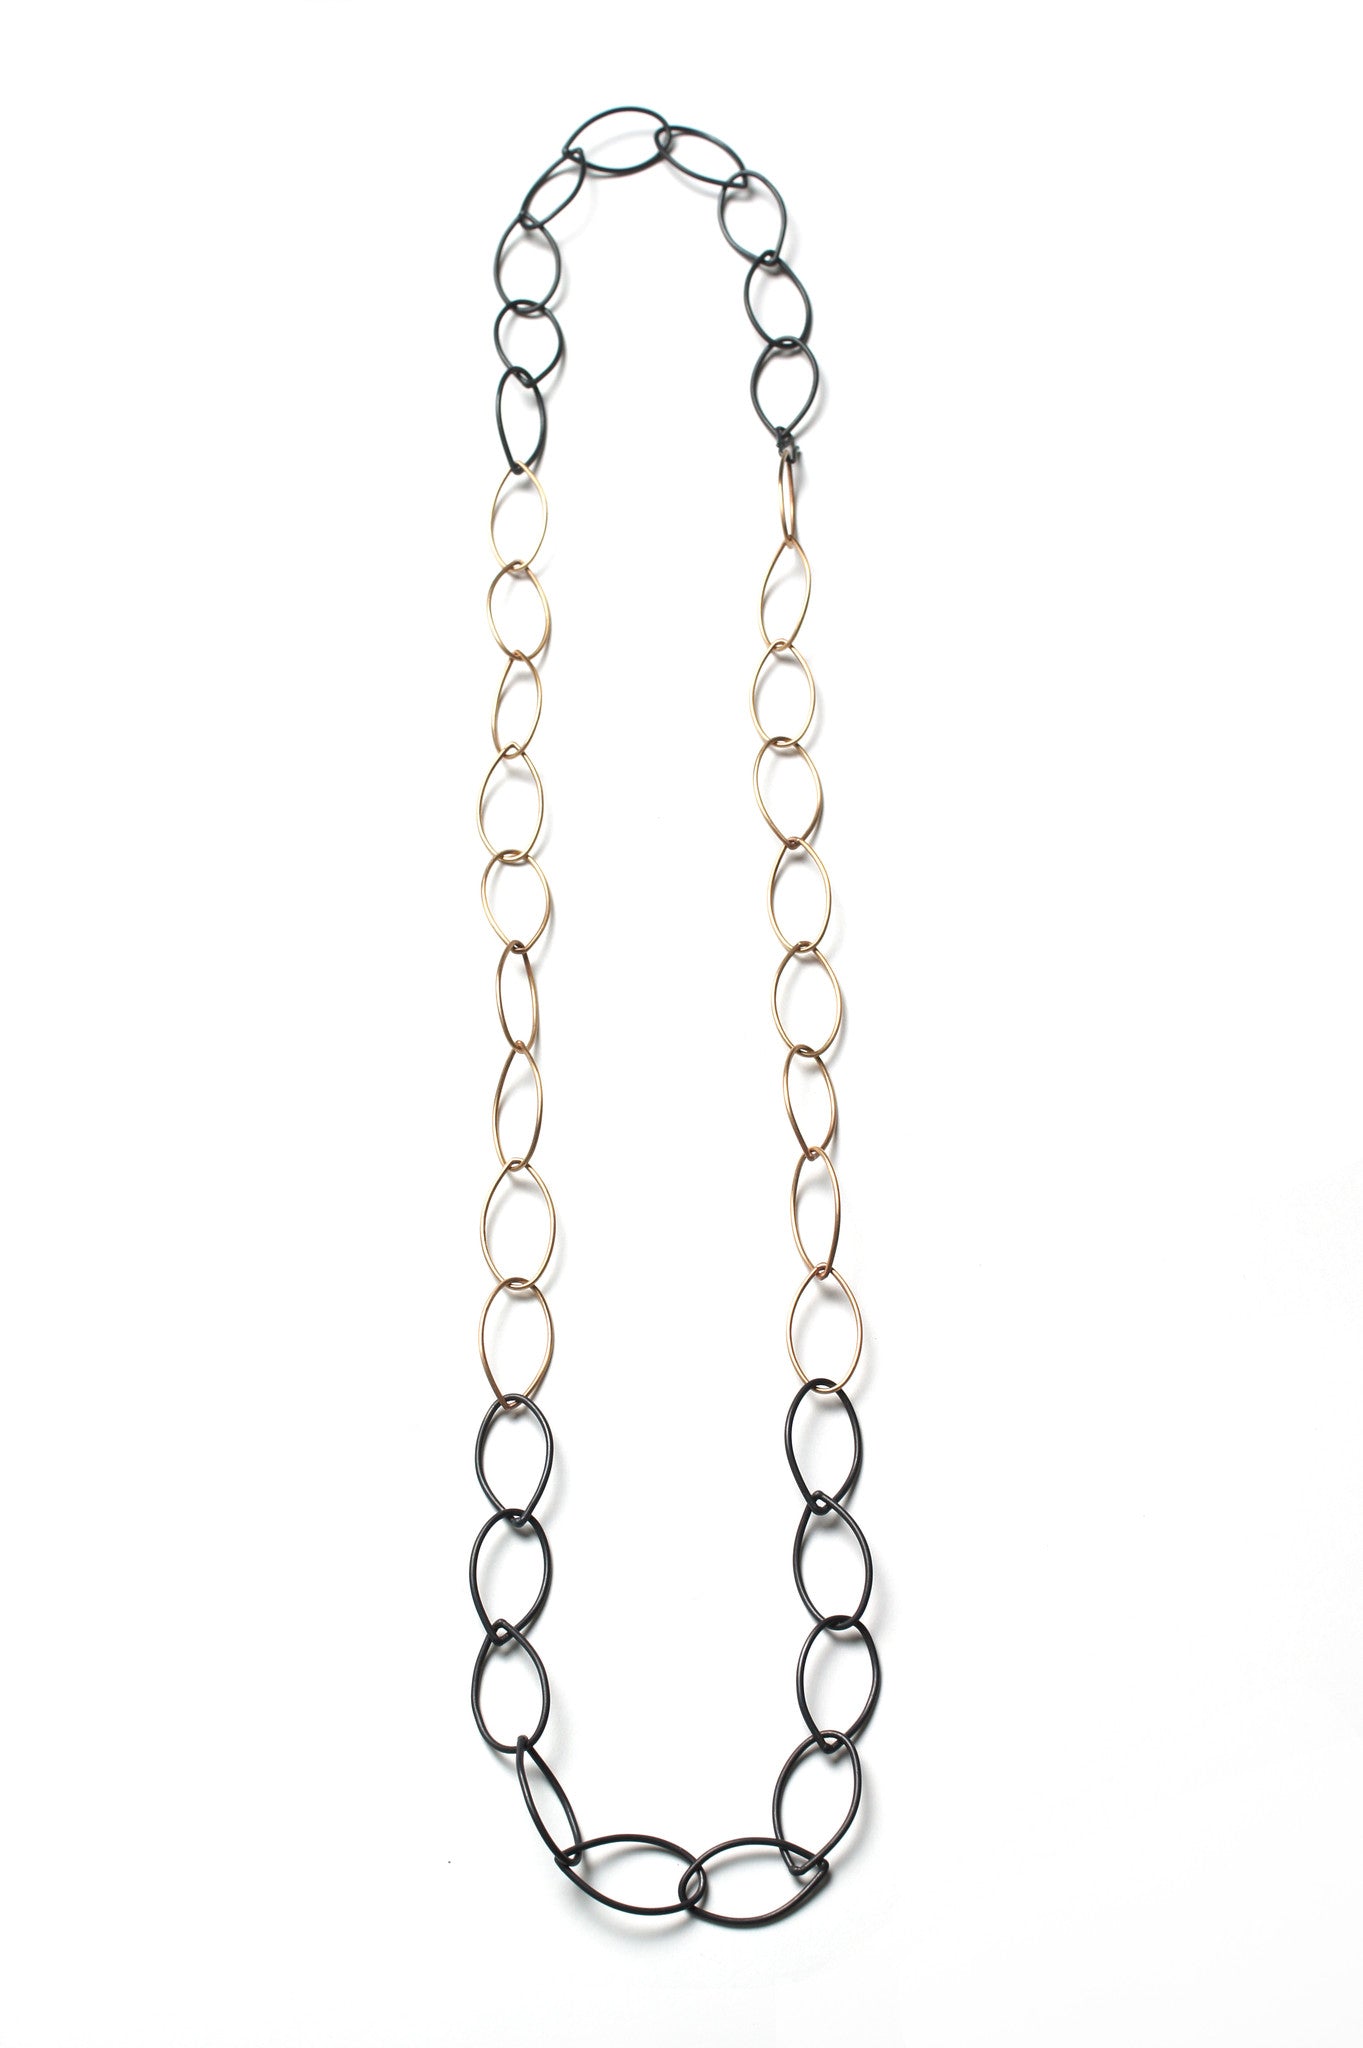 steel and bronze modern chain link two-tone long necklace